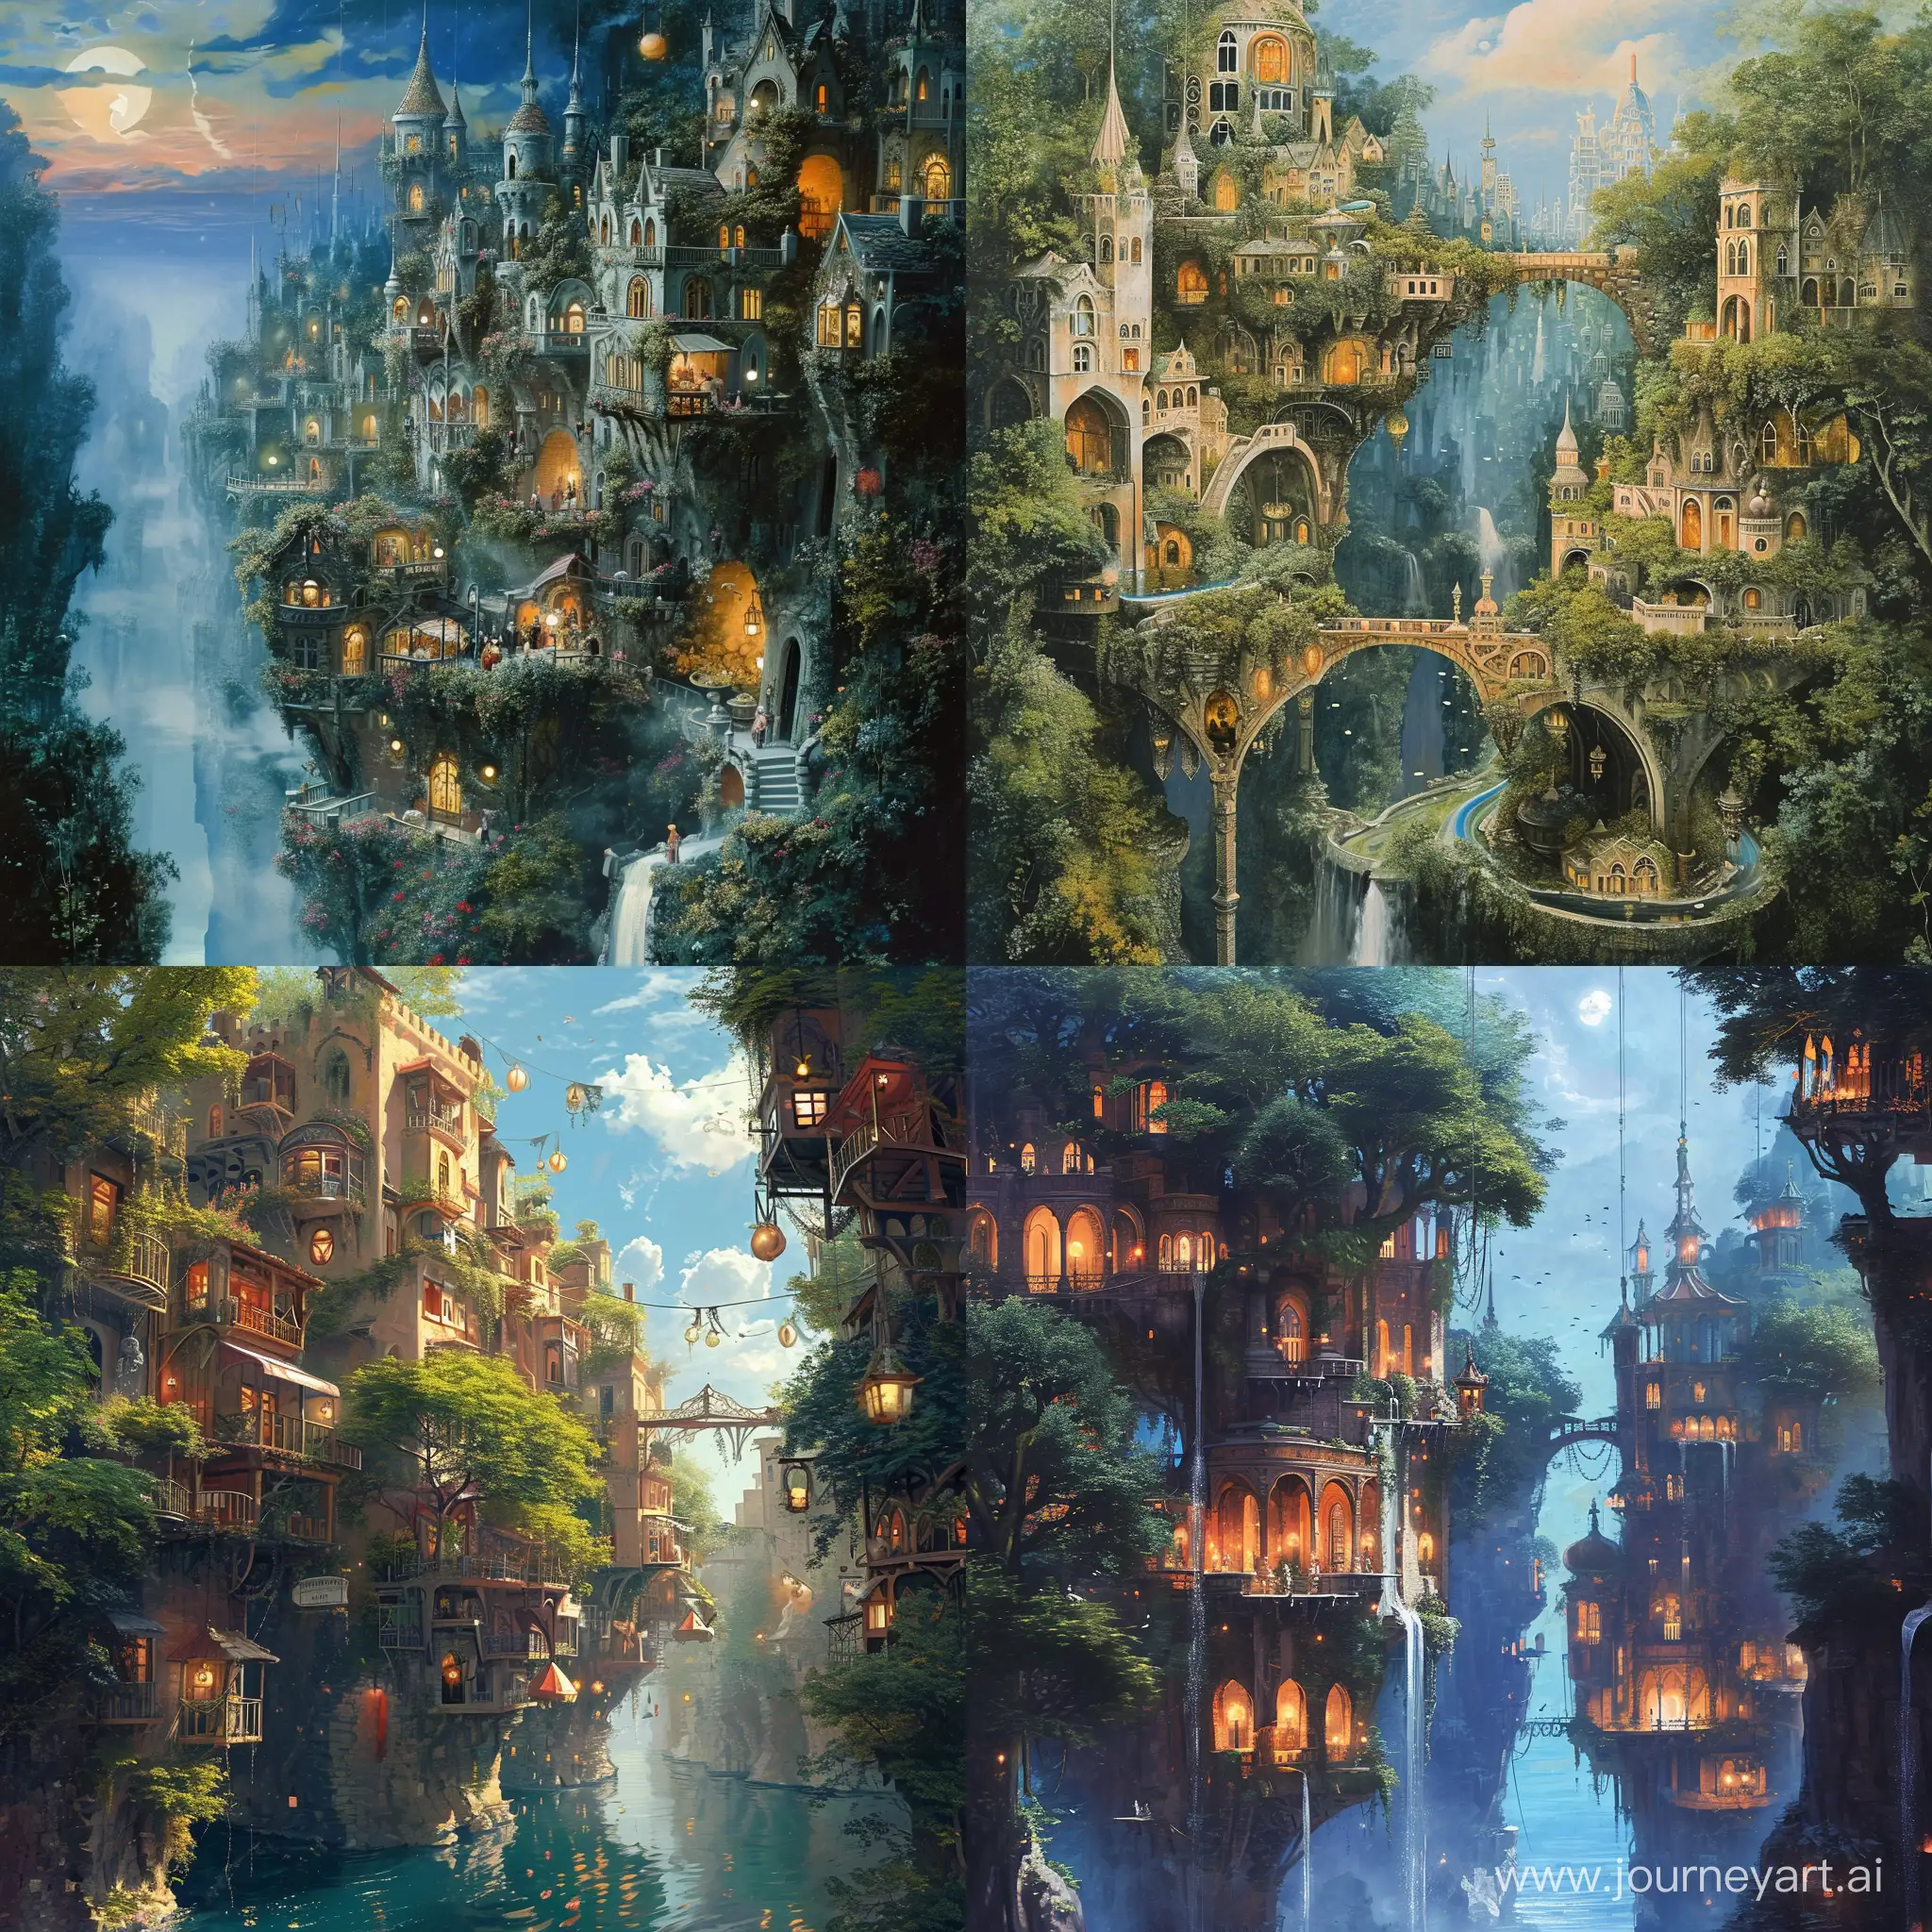 Romanticism::1.5. depicts a fantastical cityscape with a river running through the middle. The buildings are covered in plants and there are many hanging objects such as lanterns and signs. The city is surrounded by trees and the sky is blue. Realism, X-ray. --v 6